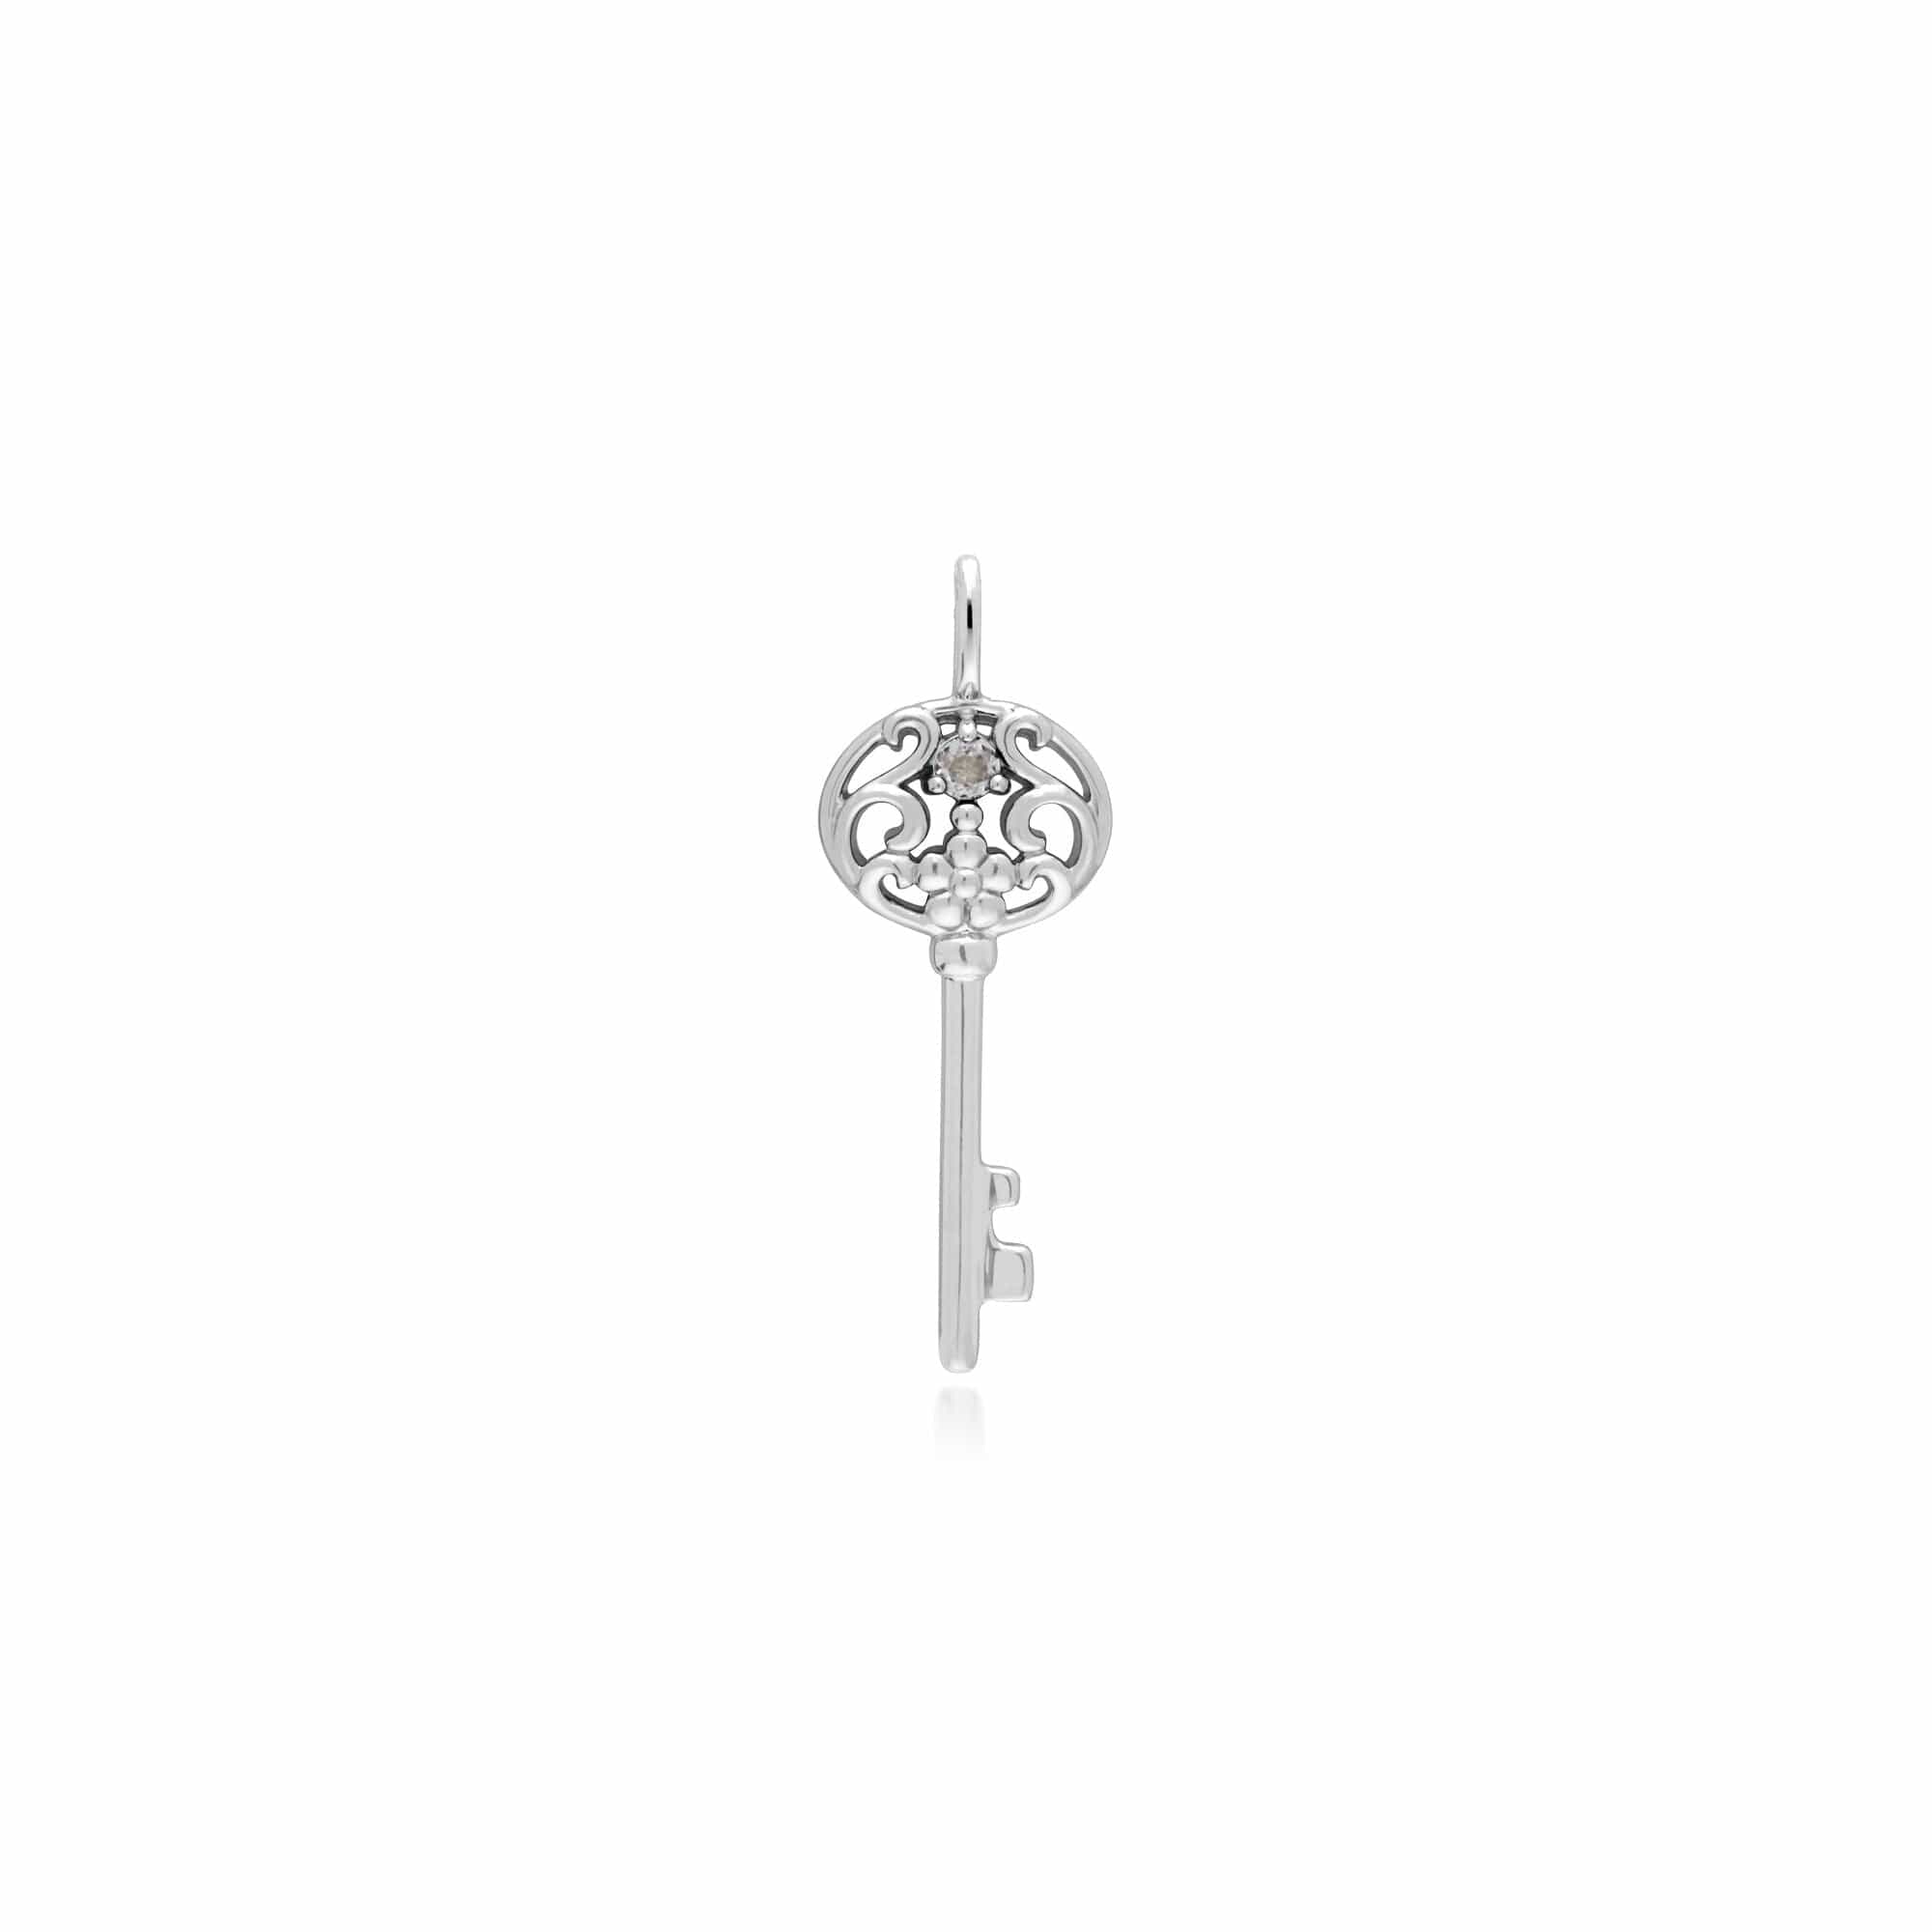 270P026814925-270P027001925 Classic Heart Lock Pendant & Clear Topaz Big Key Charm in 925 Sterling Silver 2